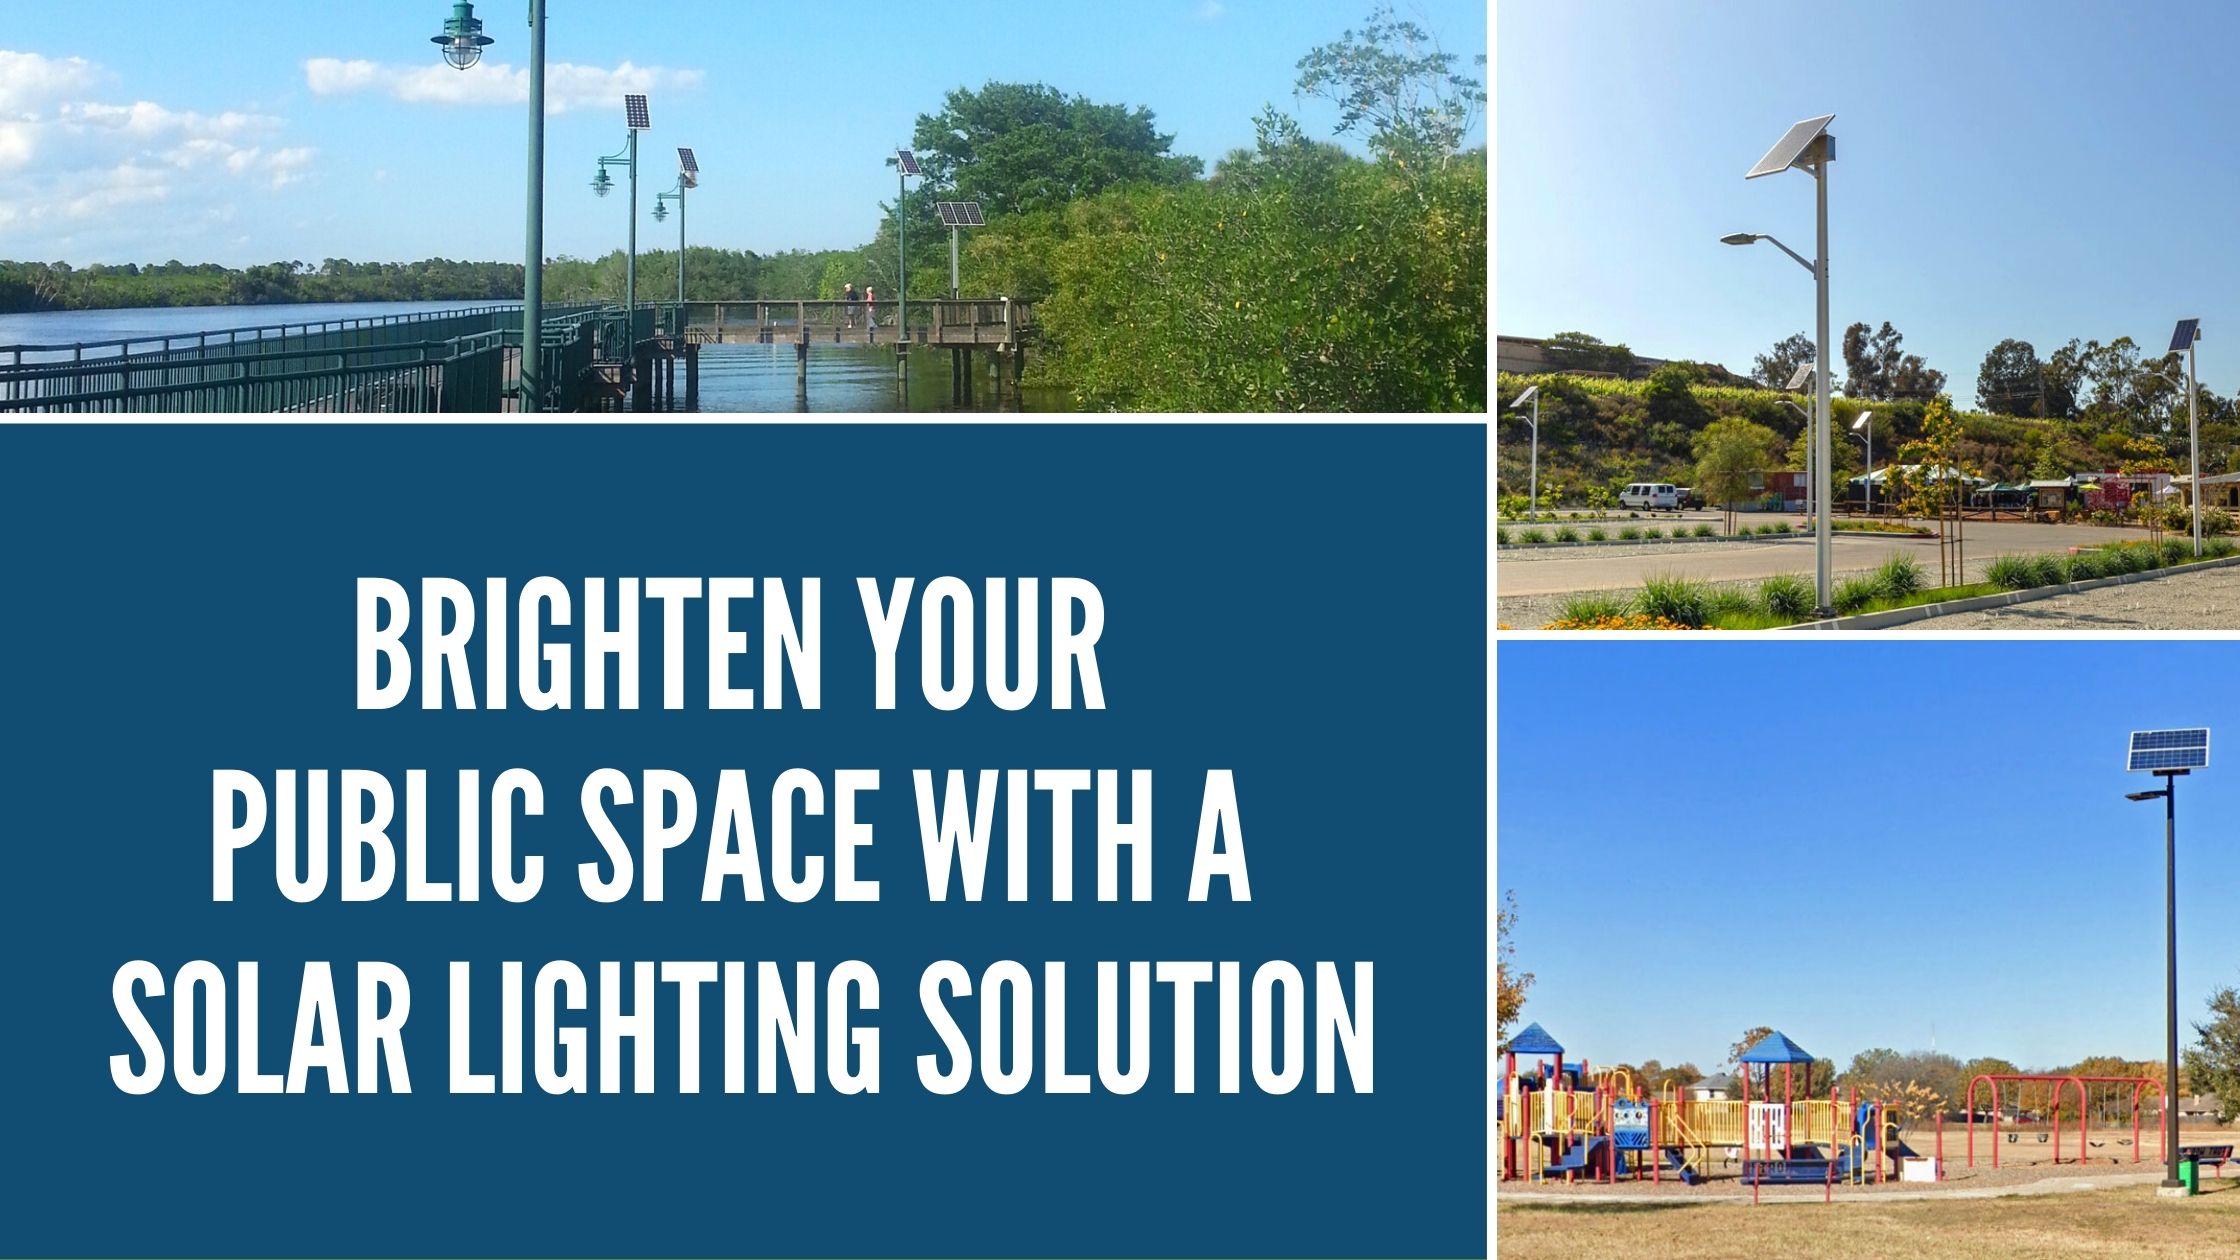 Brighten Your Public Space with a Solar Lighting Solution